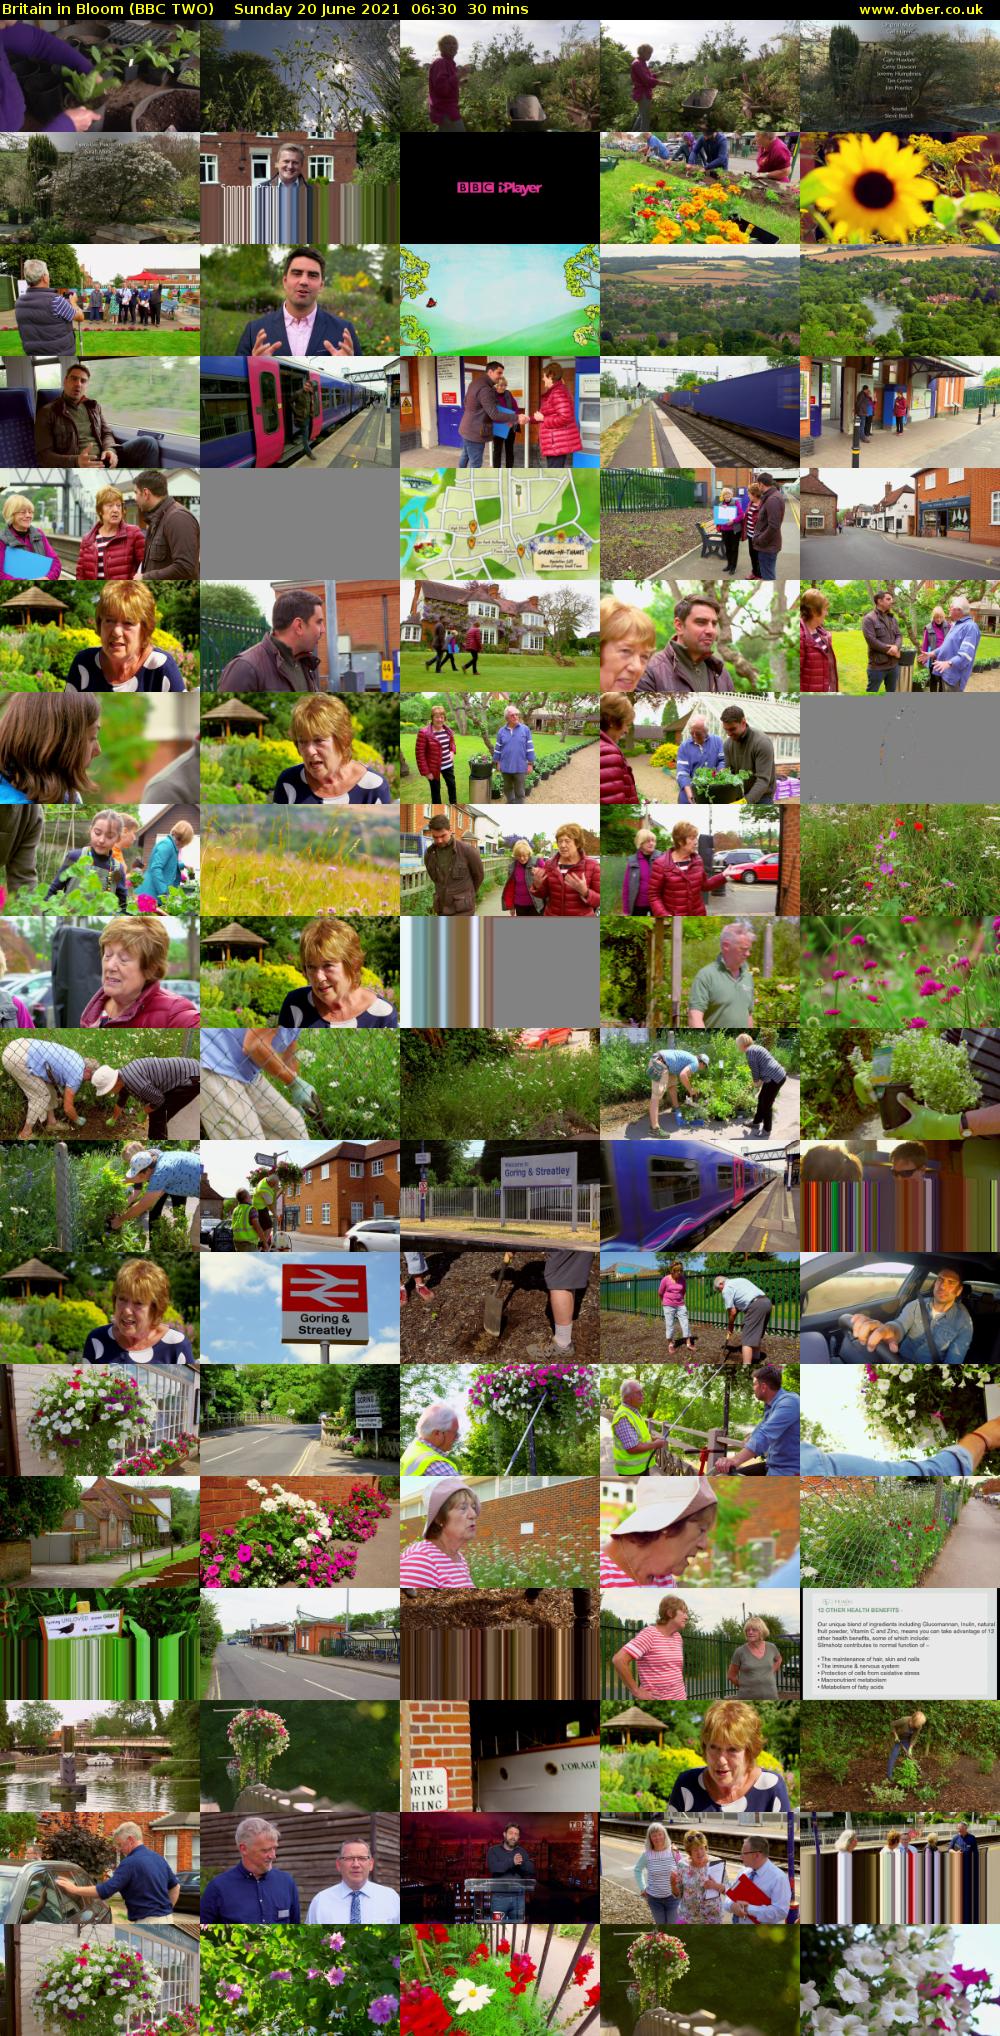 Britain in Bloom (BBC TWO) Sunday 20 June 2021 06:30 - 07:00